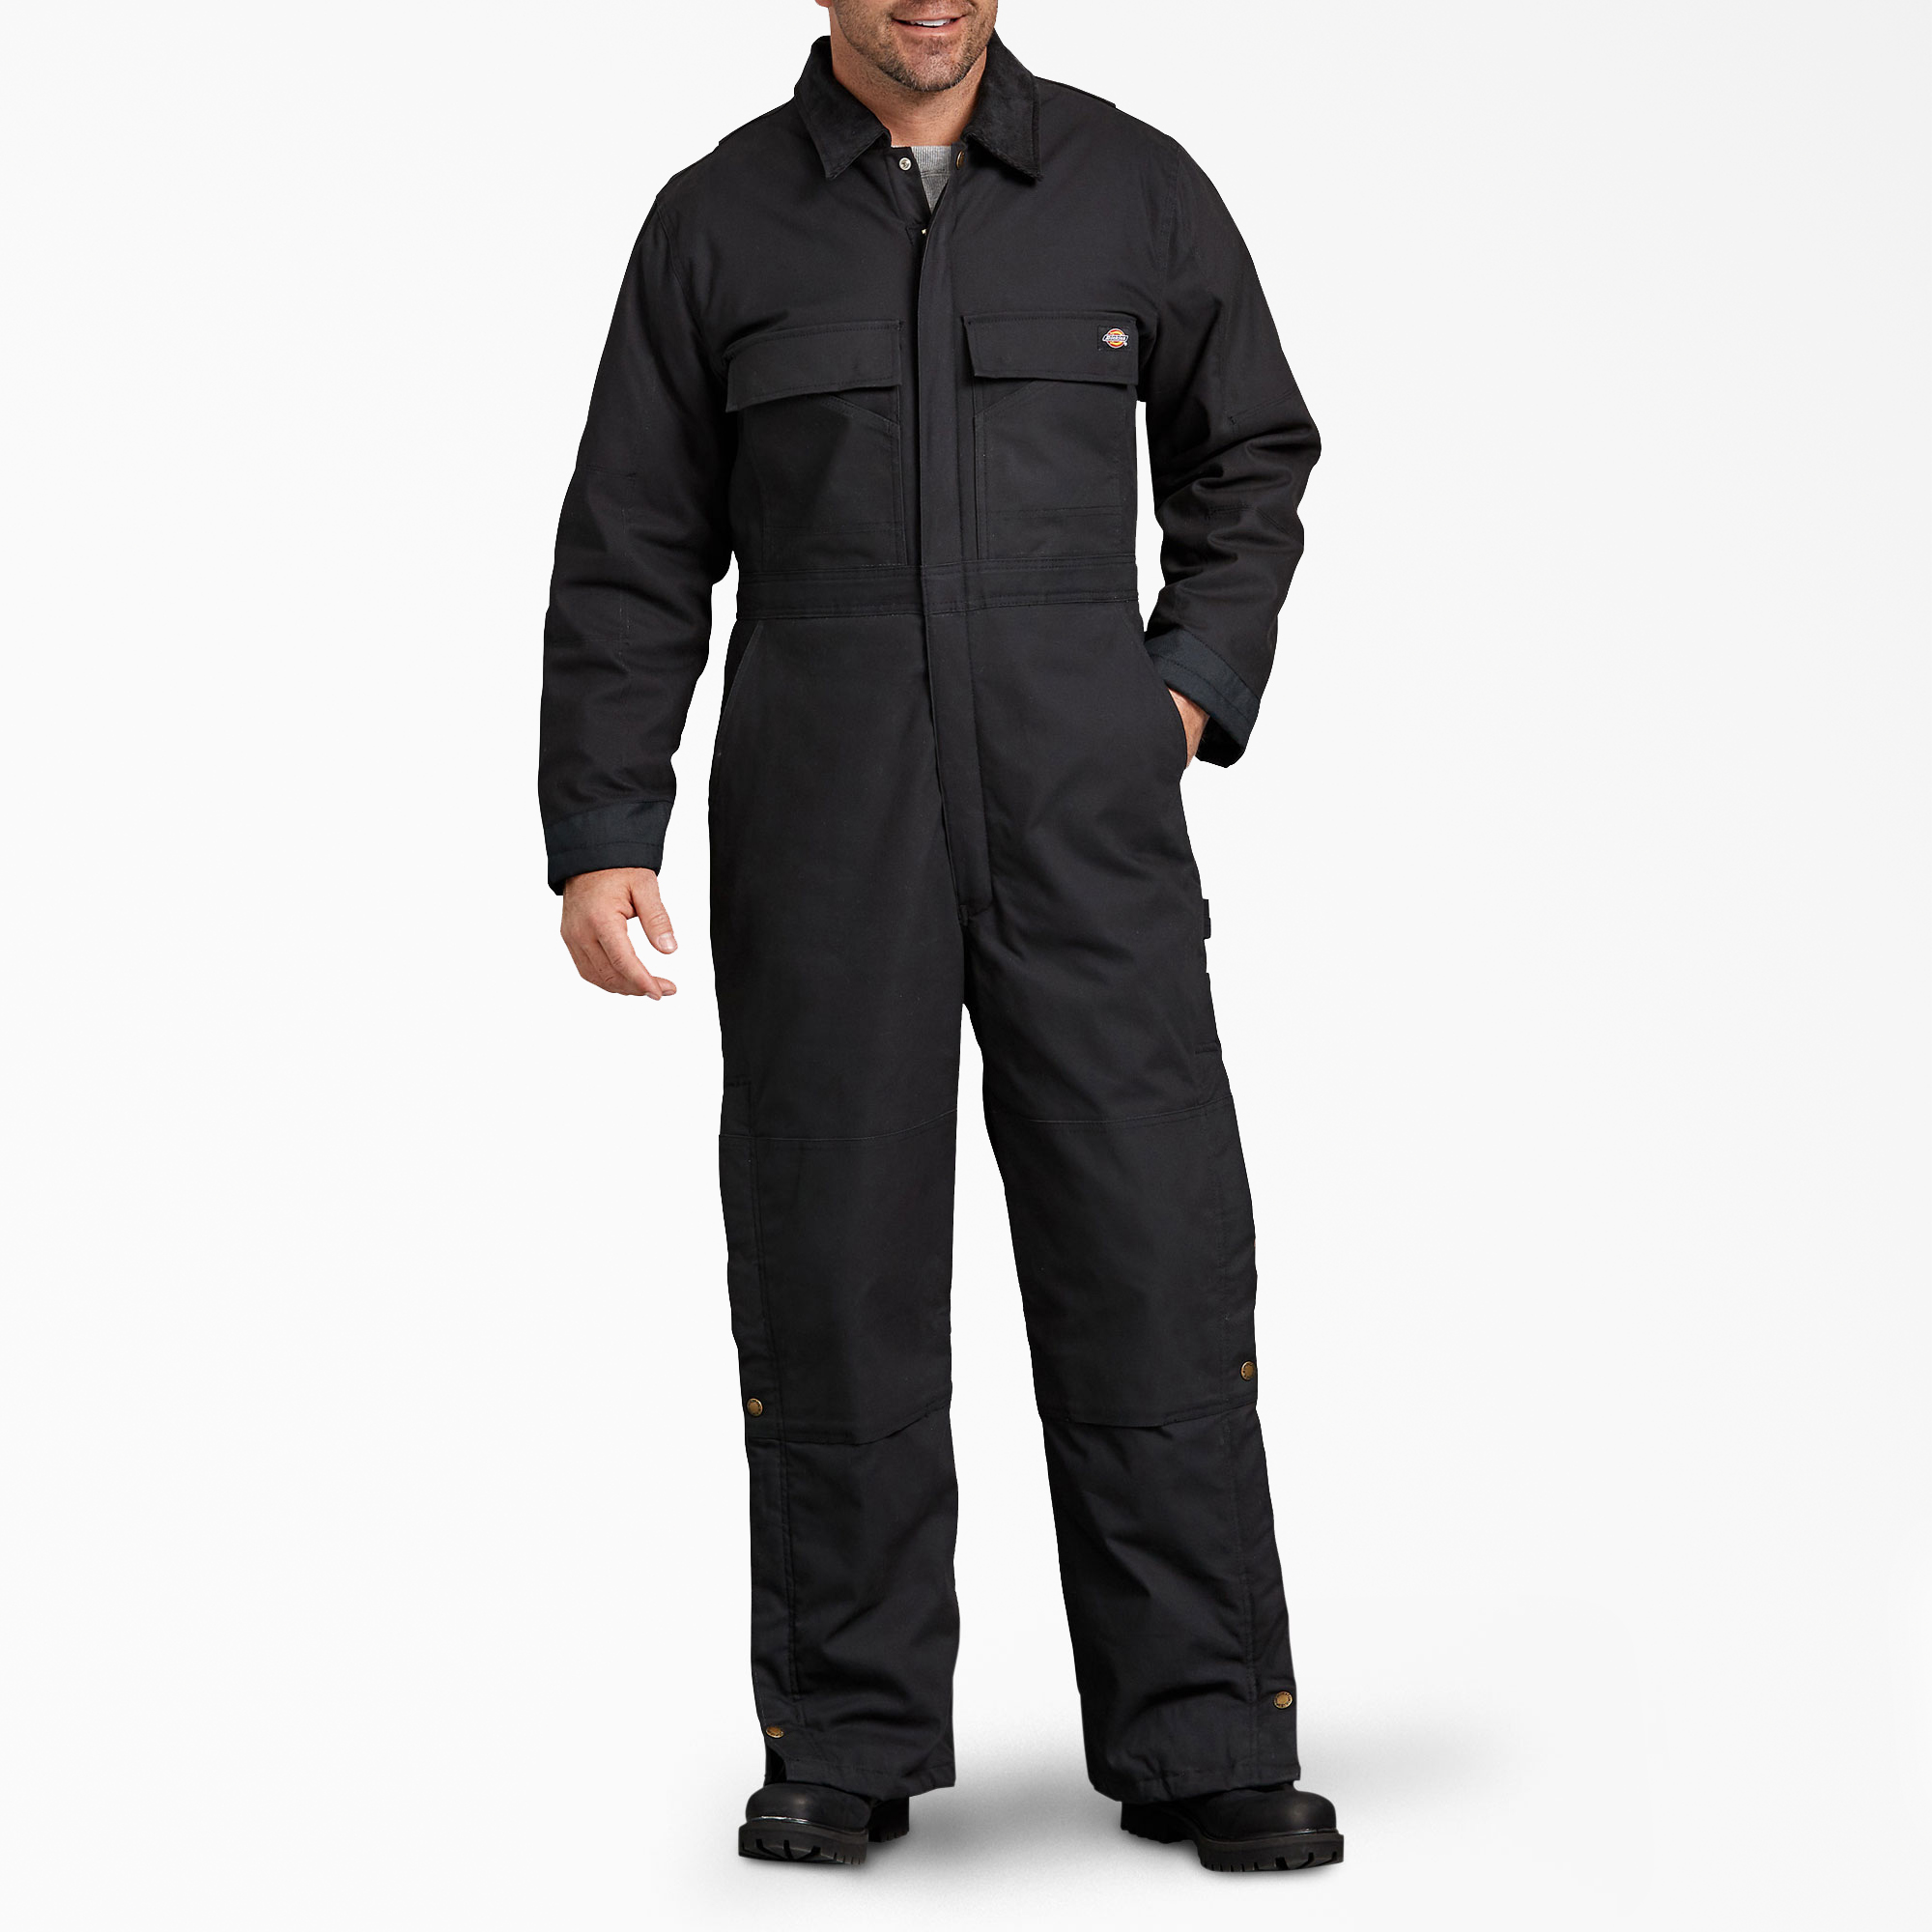 Workwear Coverall Overall Tuff Work Garage Uniform Boilersuit Hooded Jumpsuit